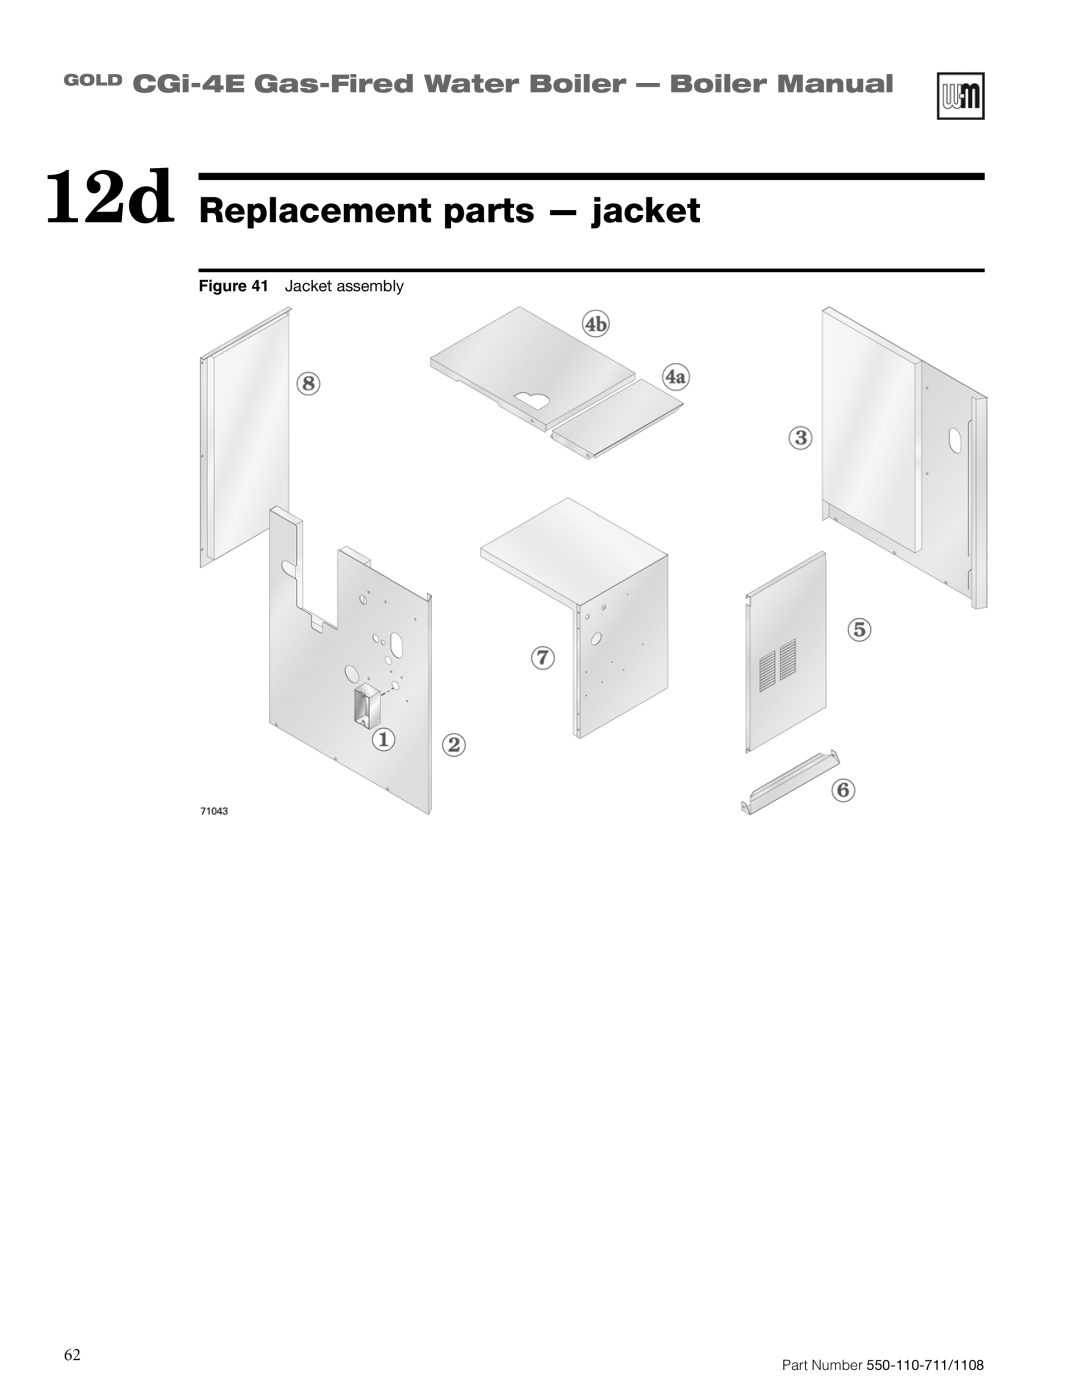 Weil-McLain CGI-4E 12d Replacement parts - jacket, GOLD CGi-4E Gas-FiredWater Boiler - Boiler Manual, Jacket assembly 